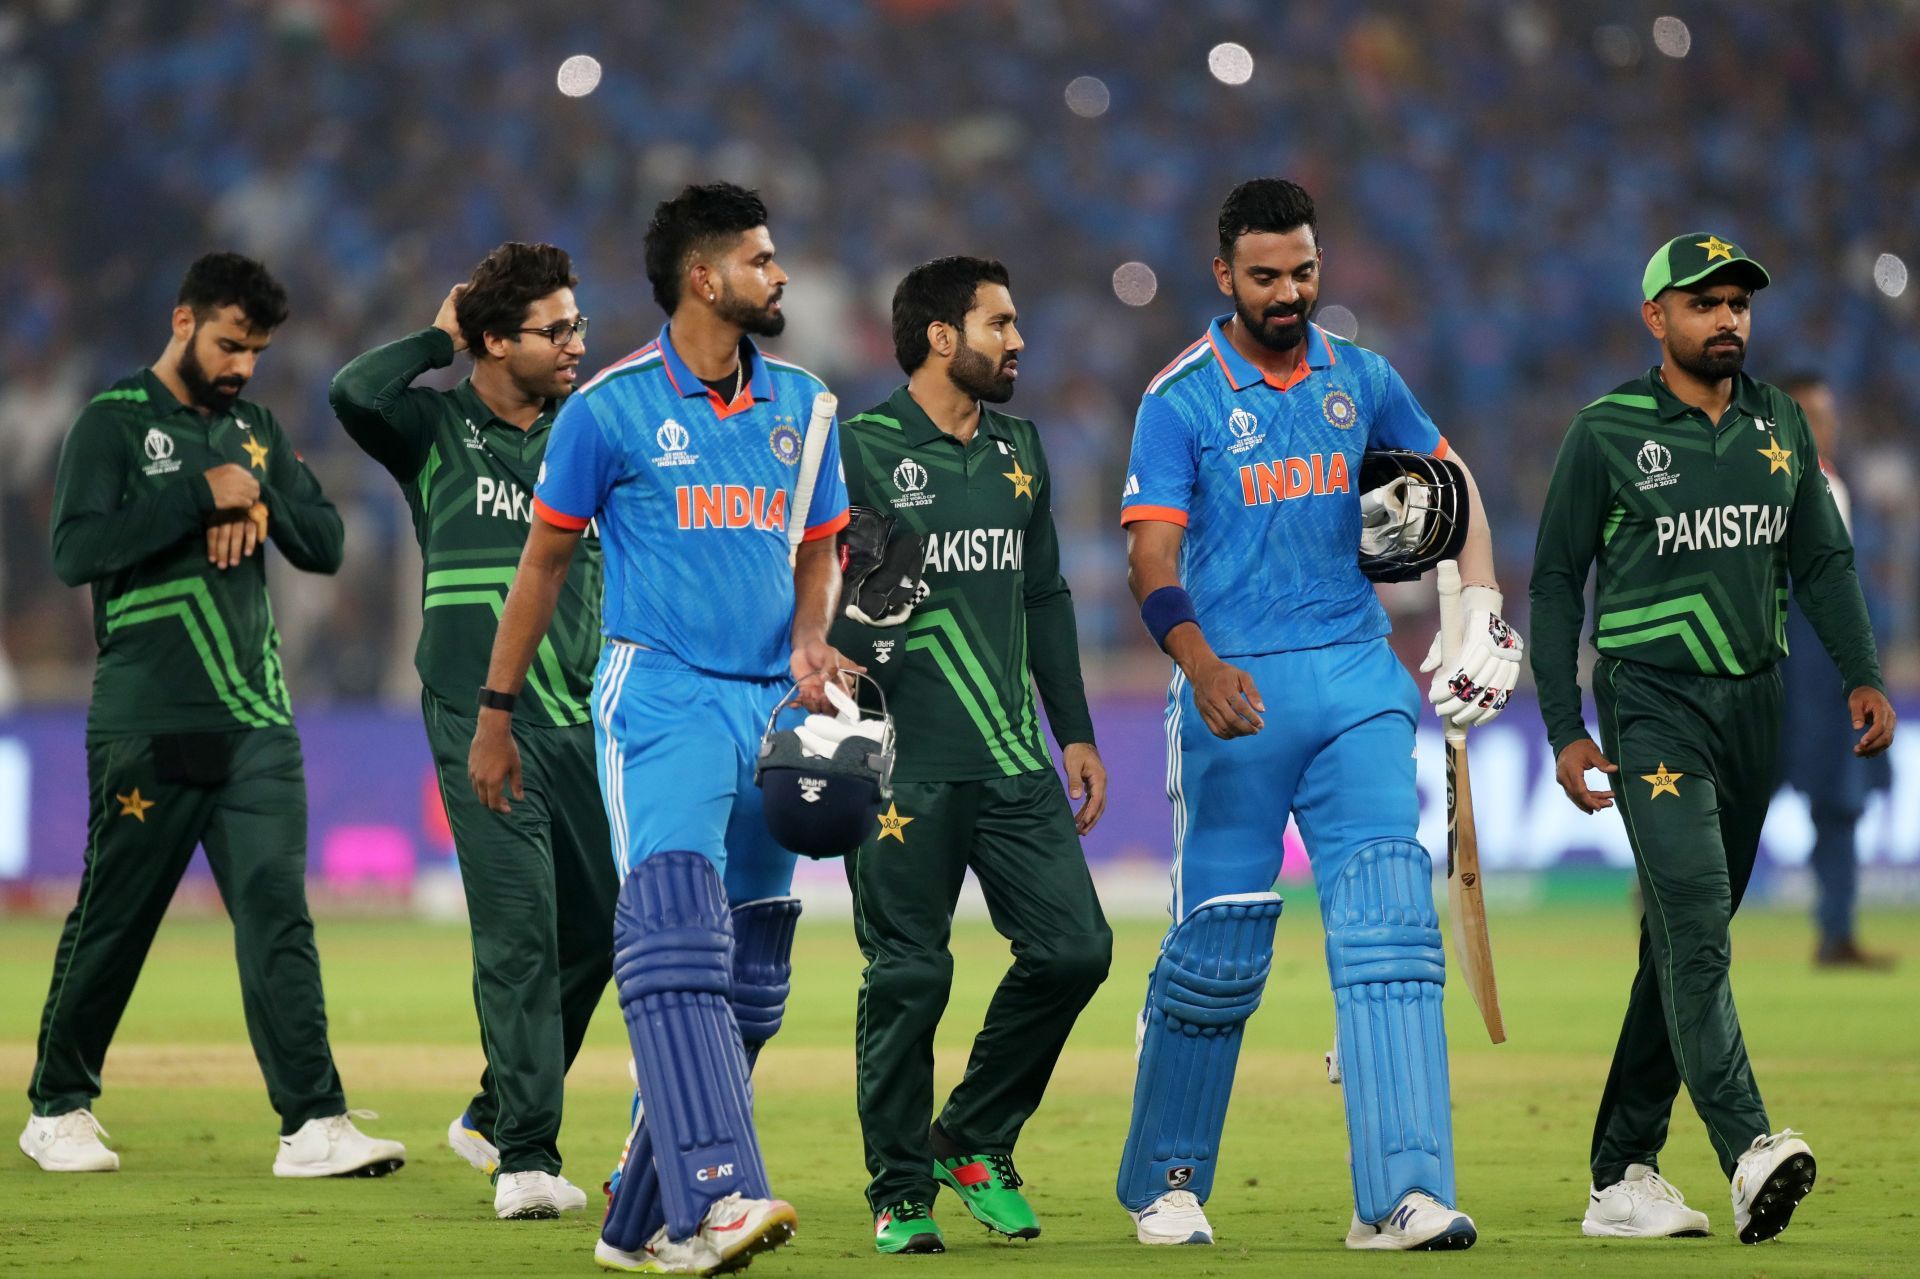 India vs Pakistan match should be an exciting game (Image: Getty)